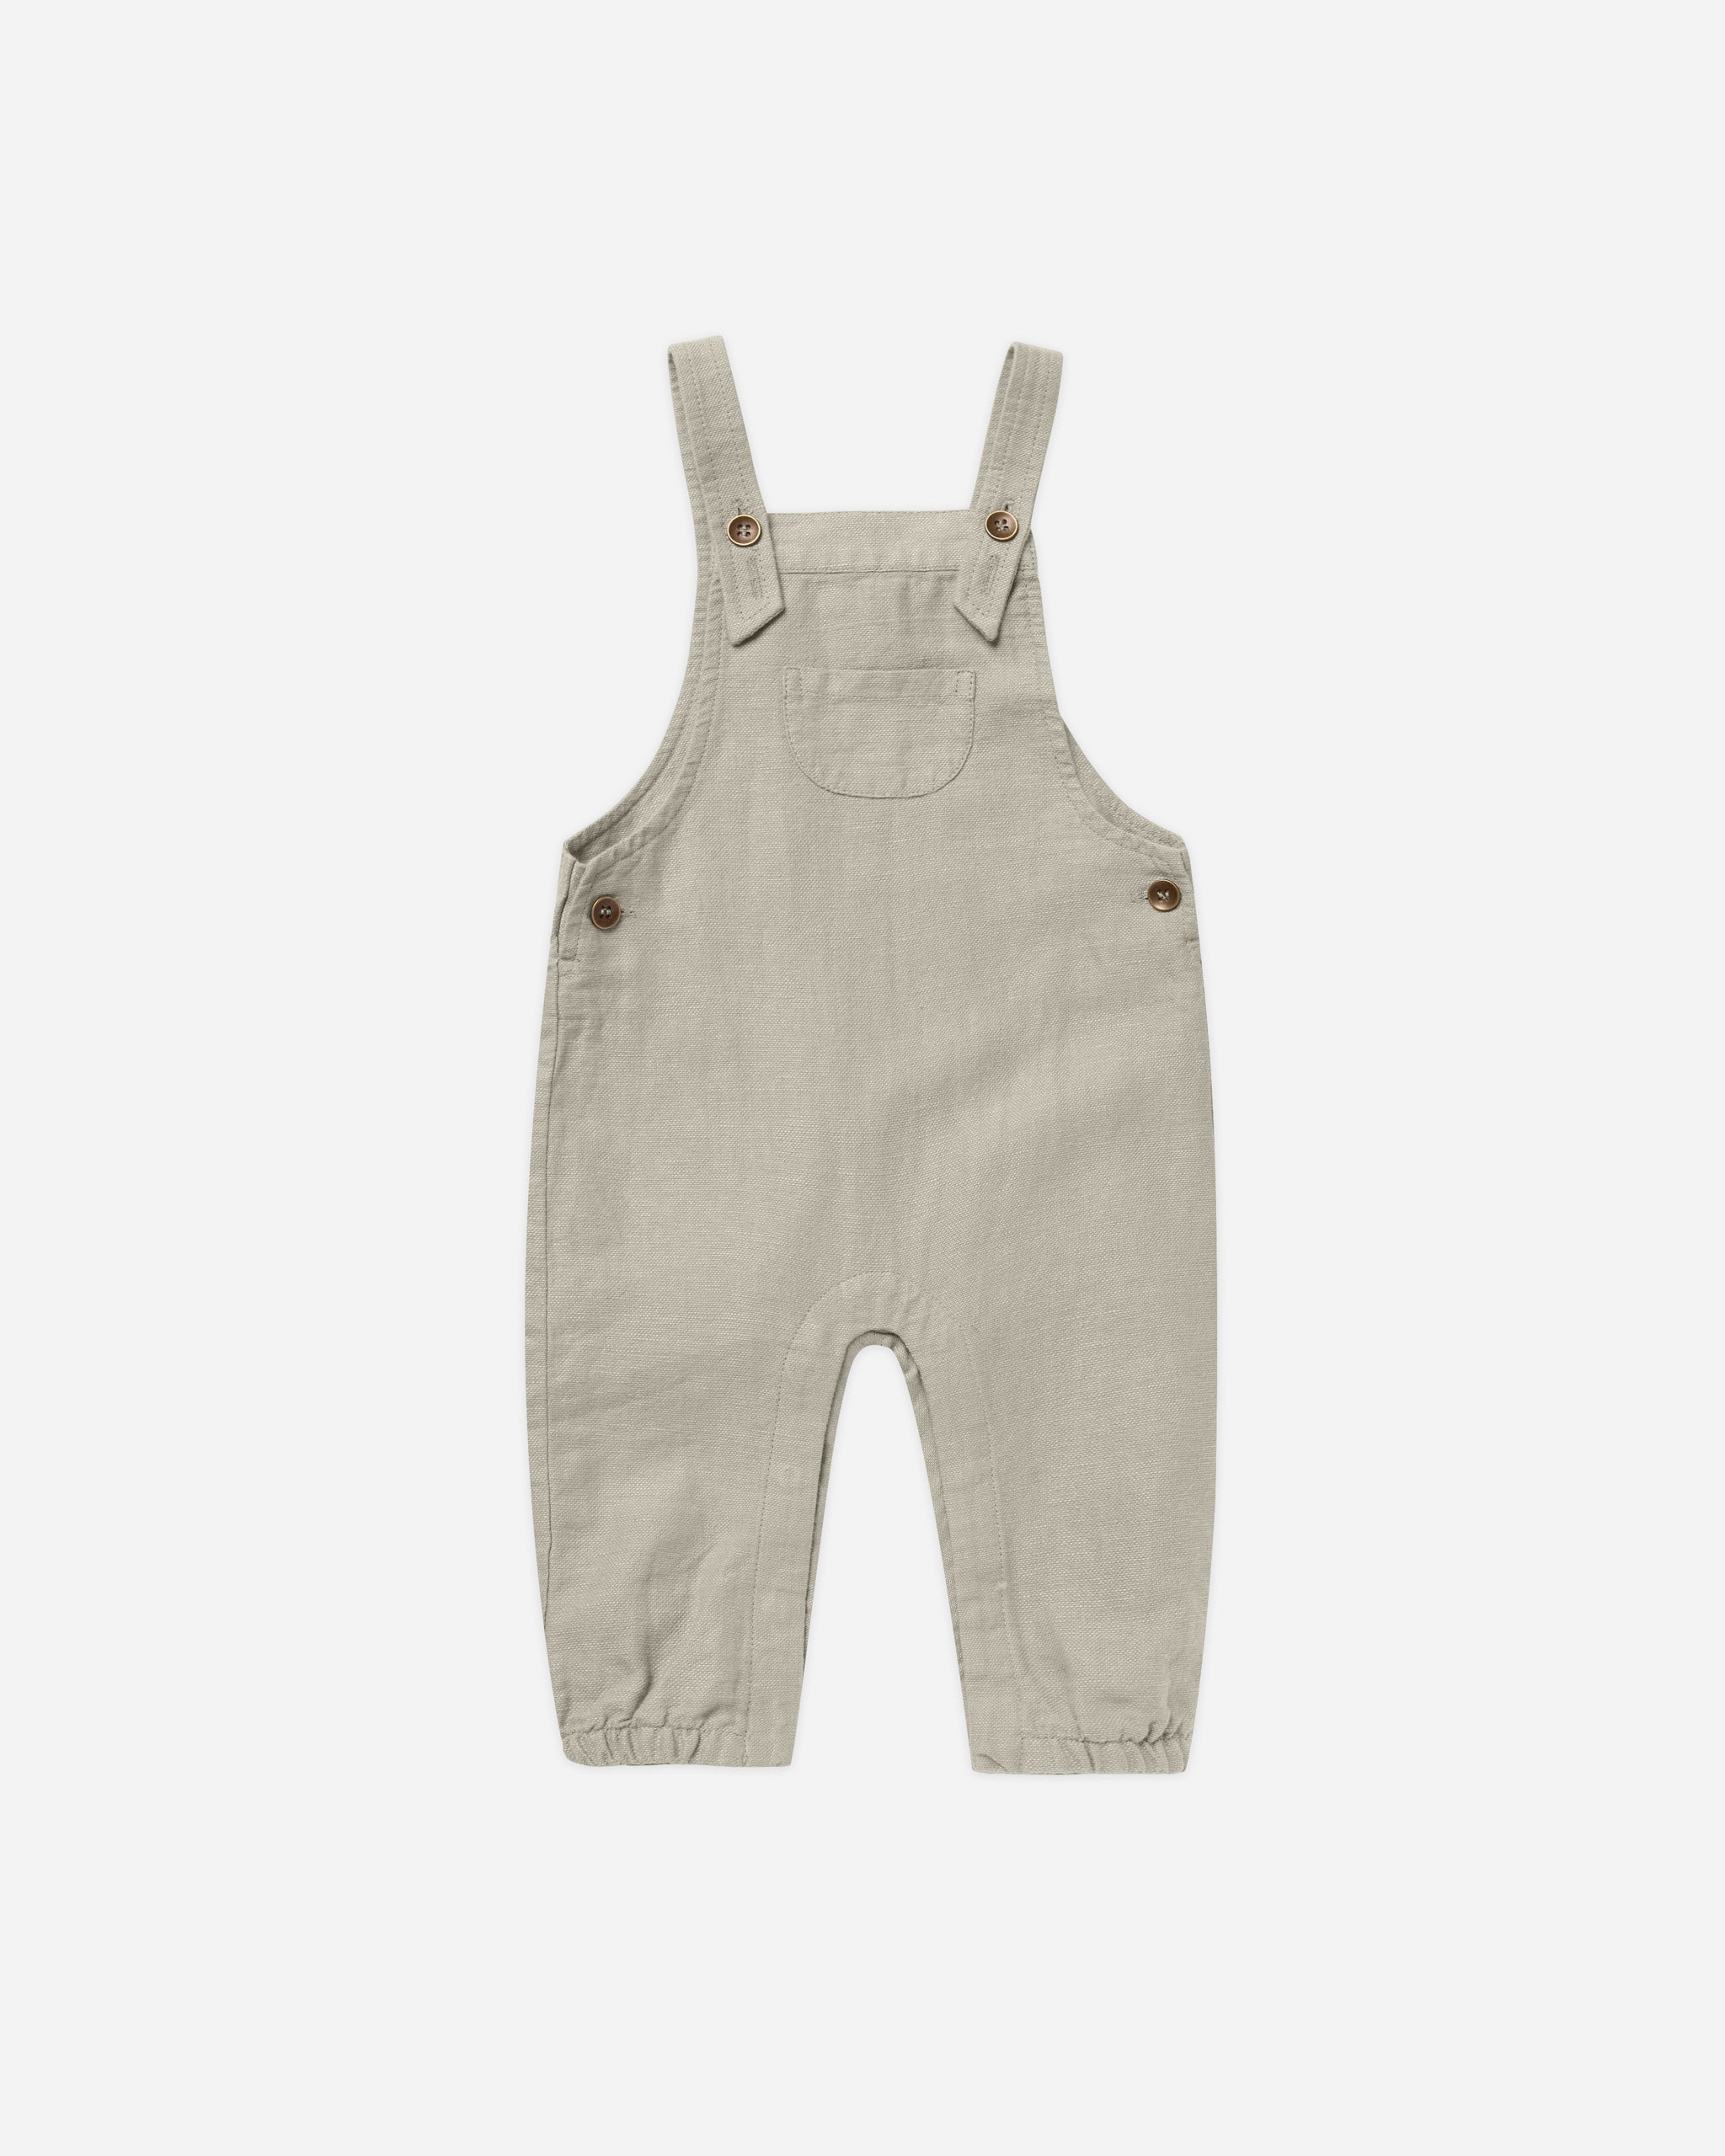 Baby Overall || Pewter - Rylee + Cru | Kids Clothes | Trendy Baby Clothes | Modern Infant Outfits |